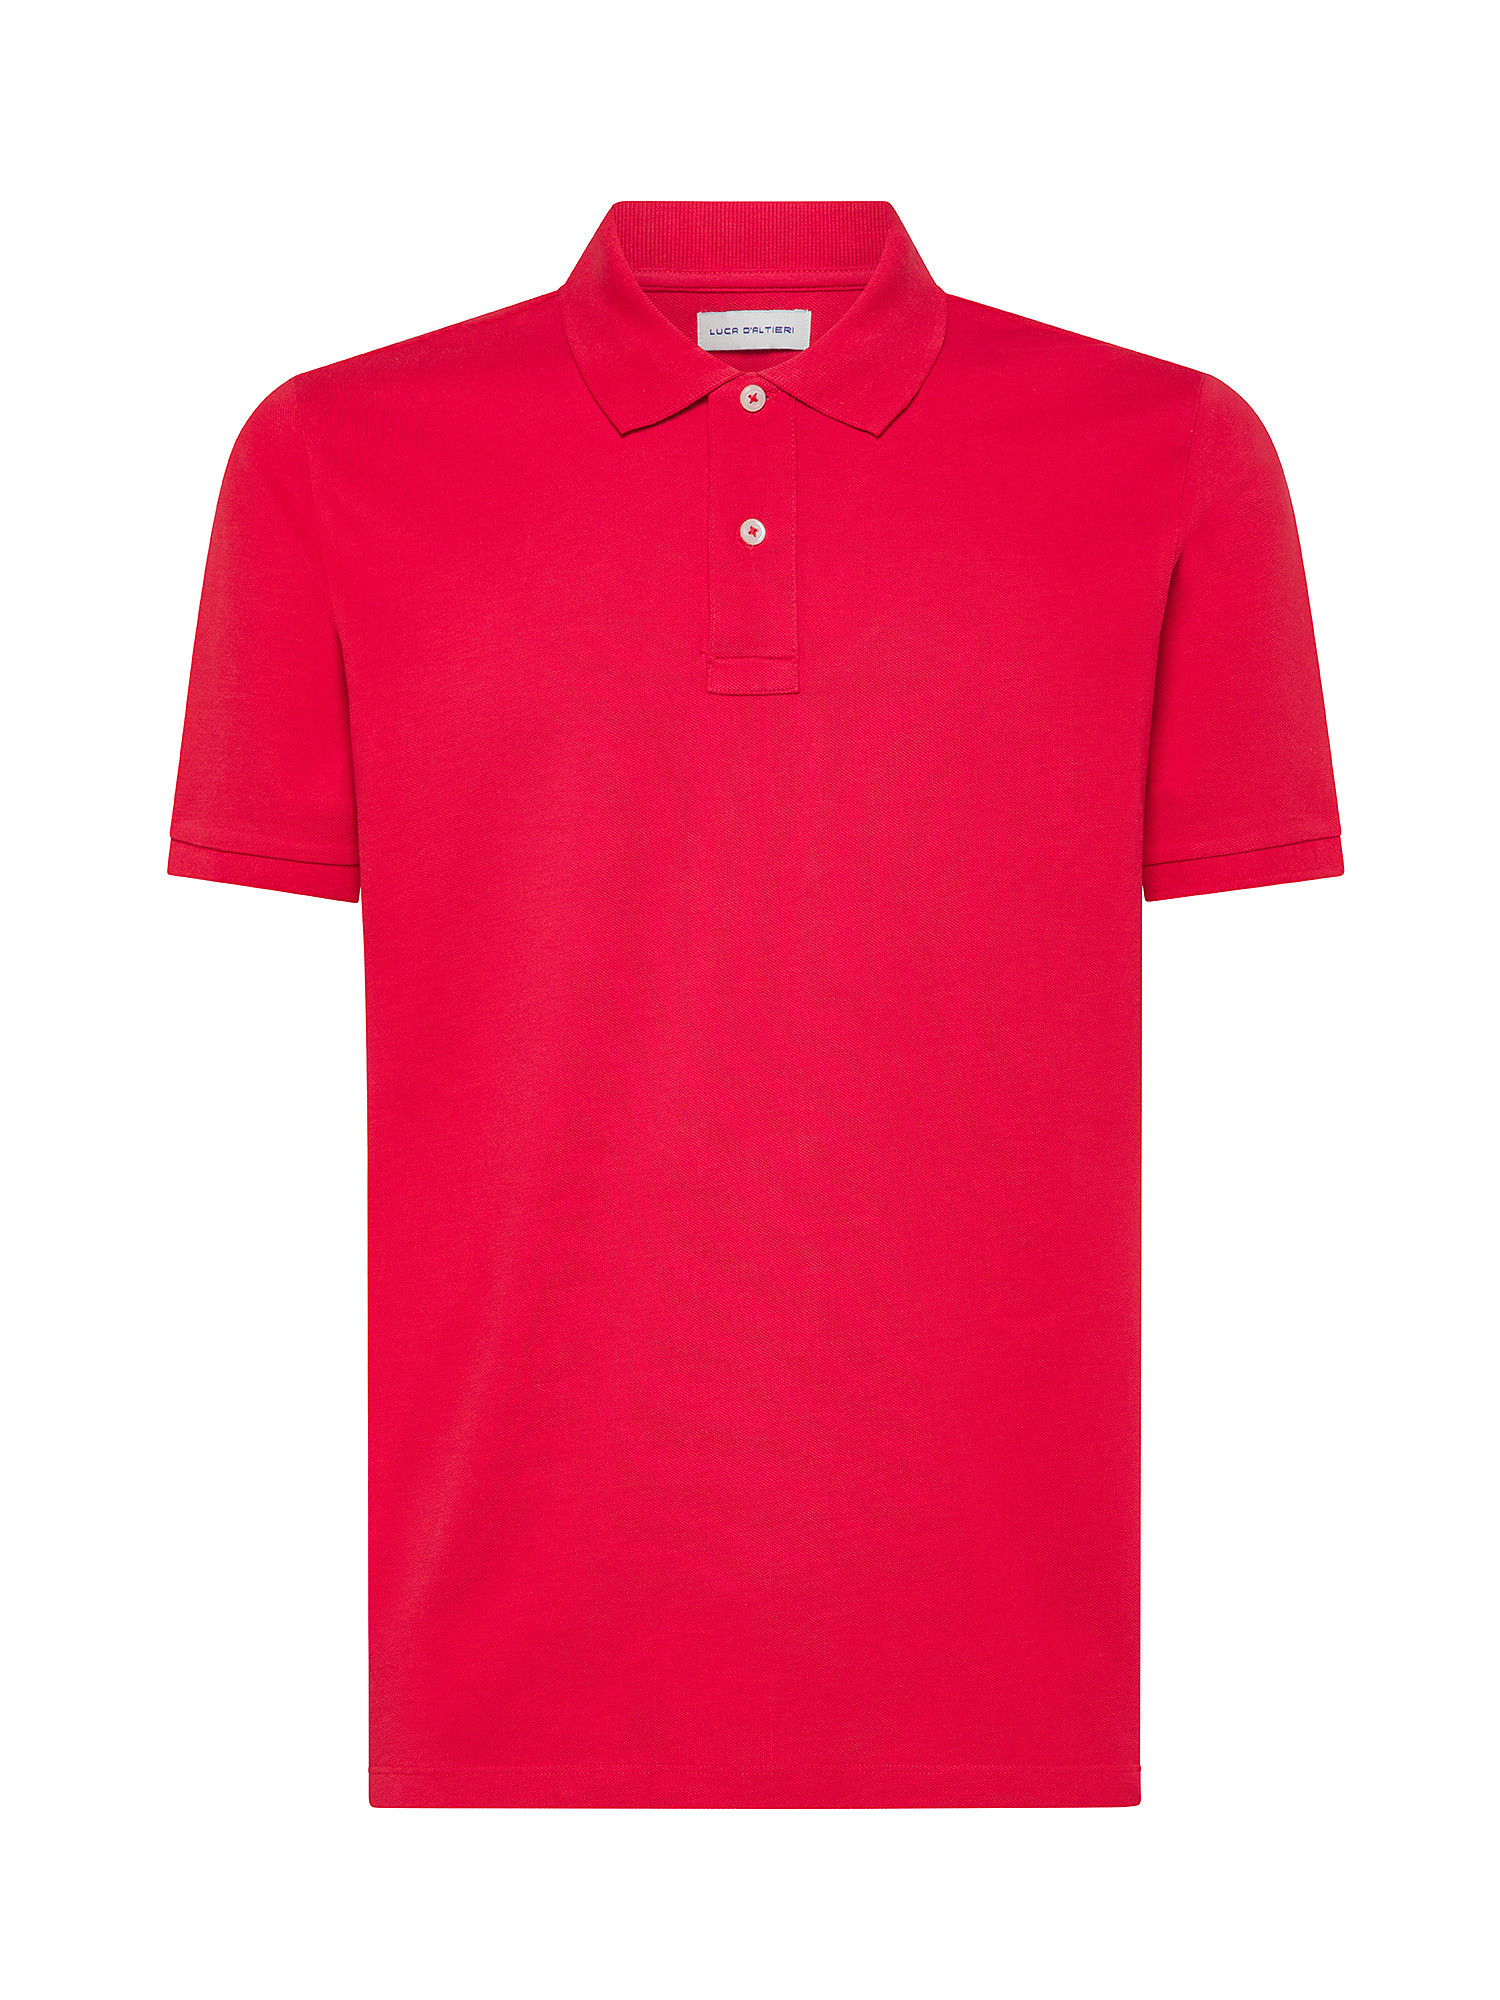 Luca D'Altieri - Polo in pure cotton, Red, large image number 0